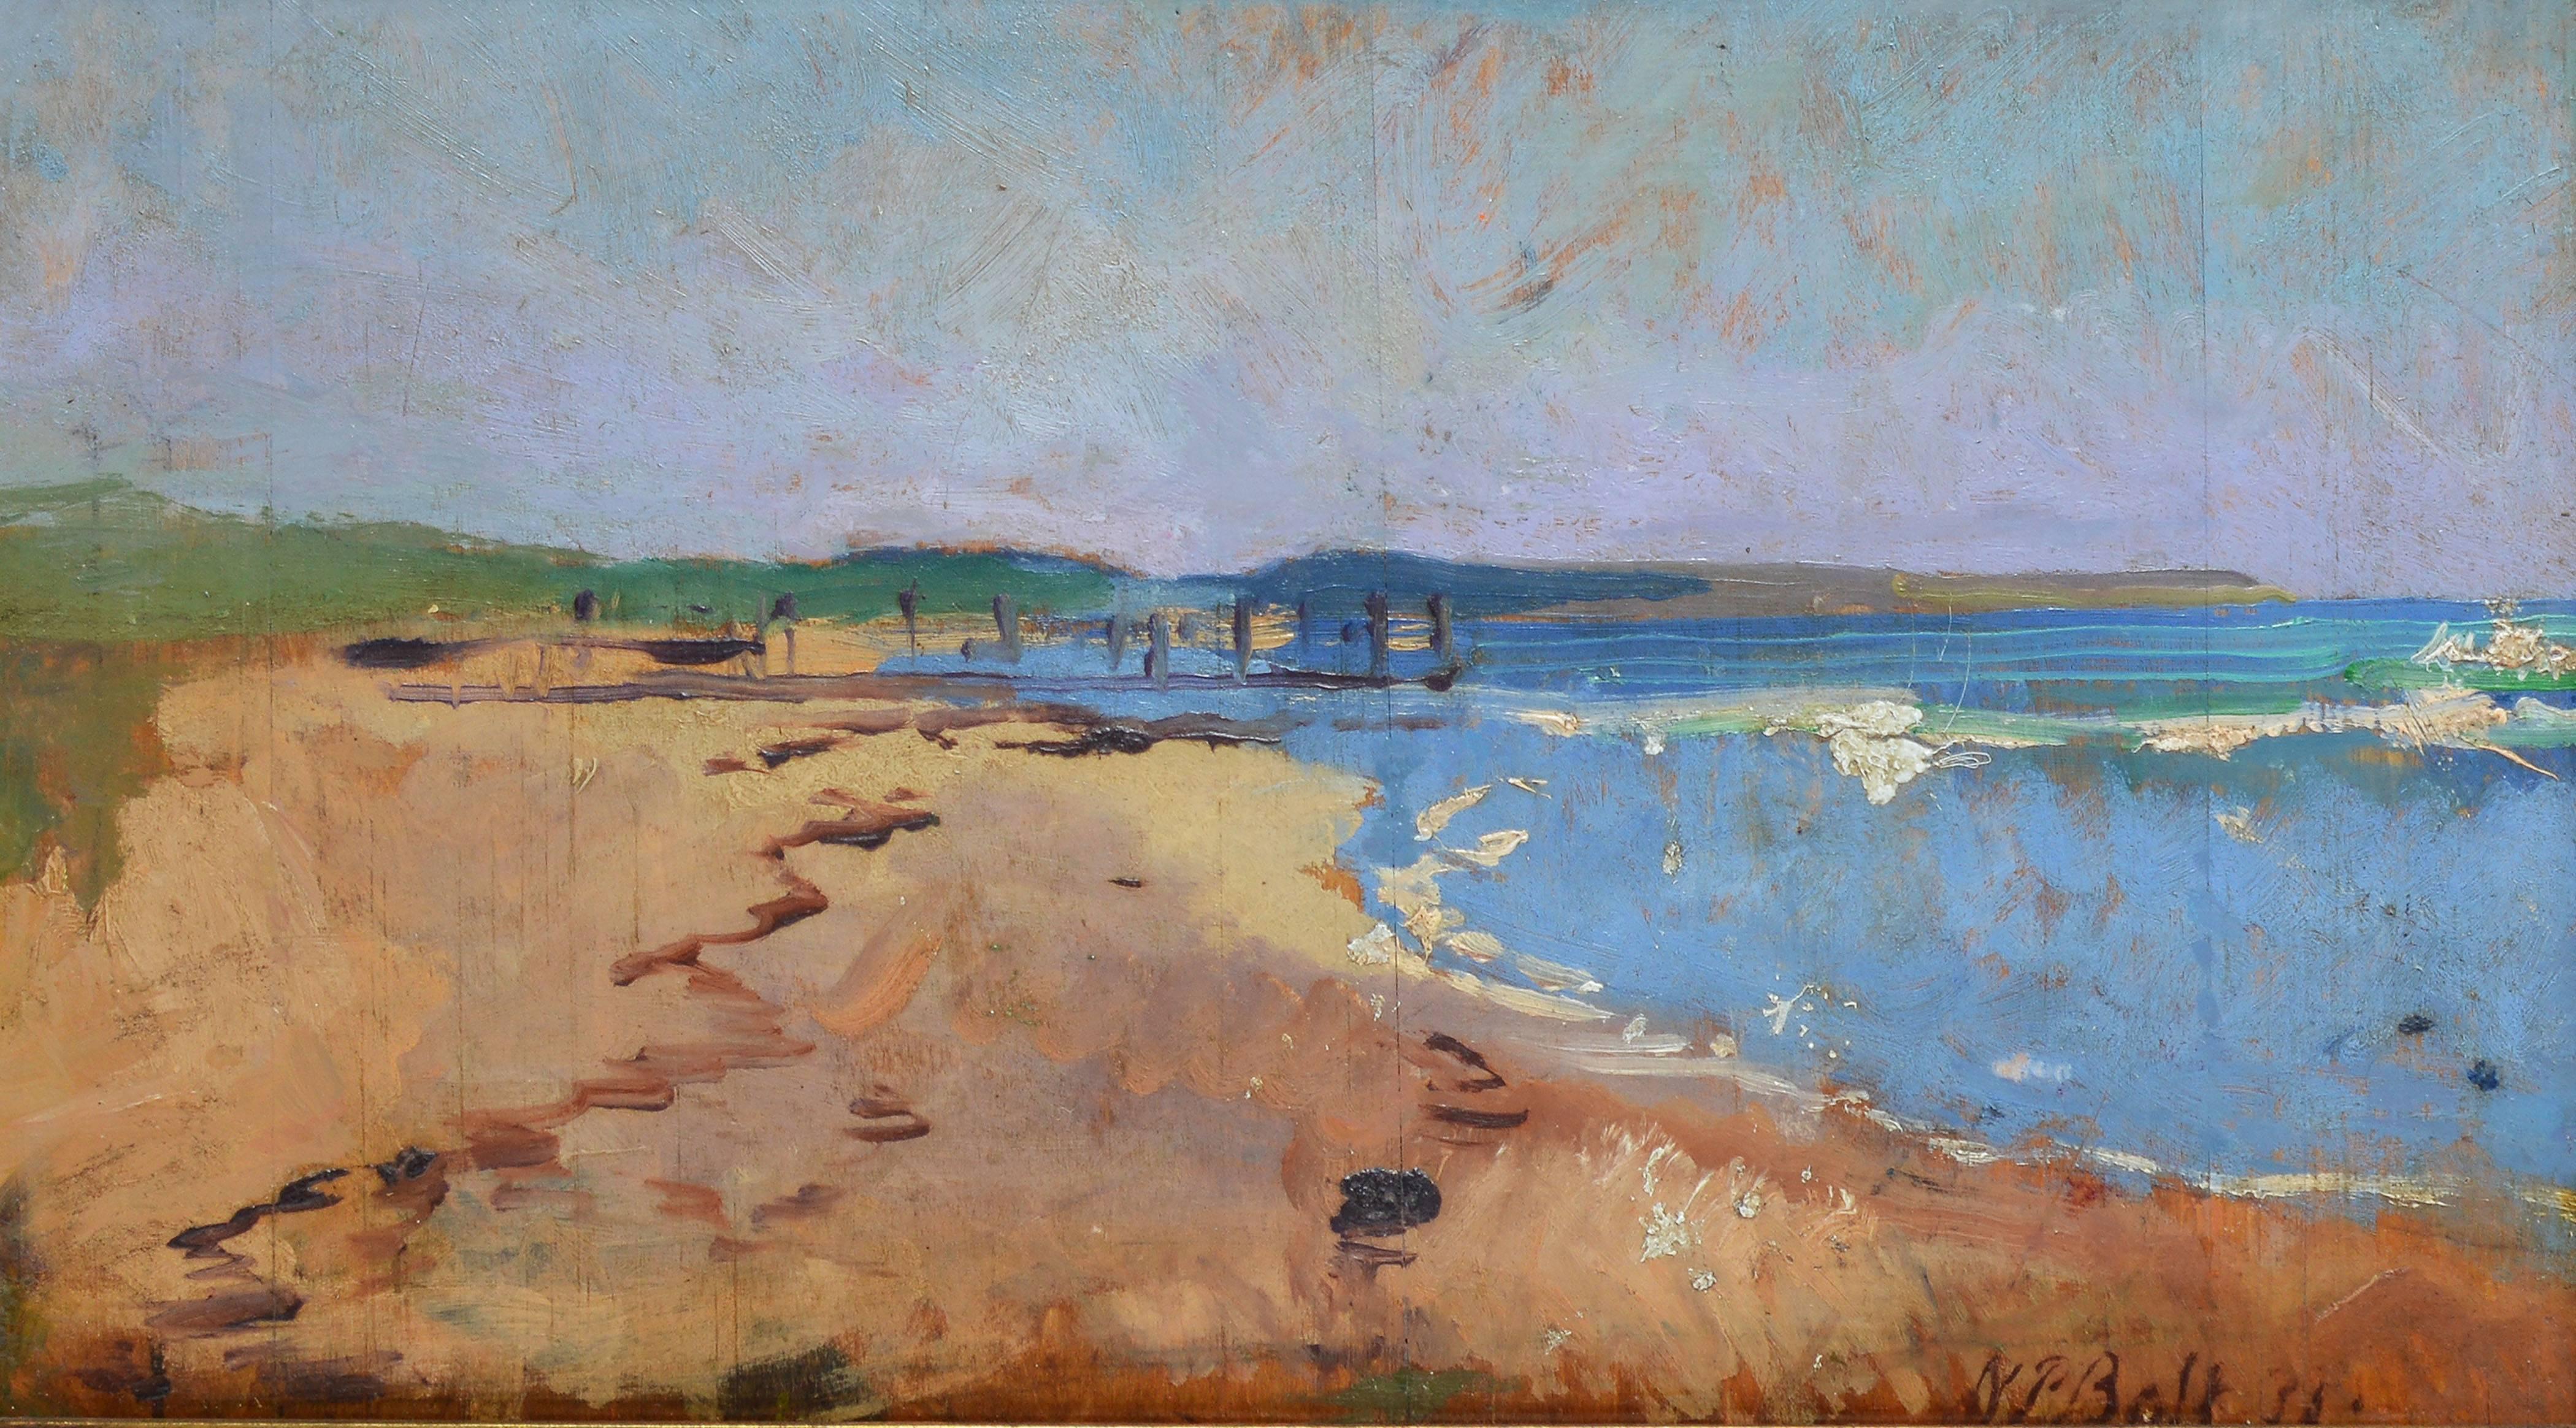 Modernist summer view of a beach.  Oil on board, circa 1935.  Signed illegibly lower right.  Displayed in a giltwood frame.  Image size, 17